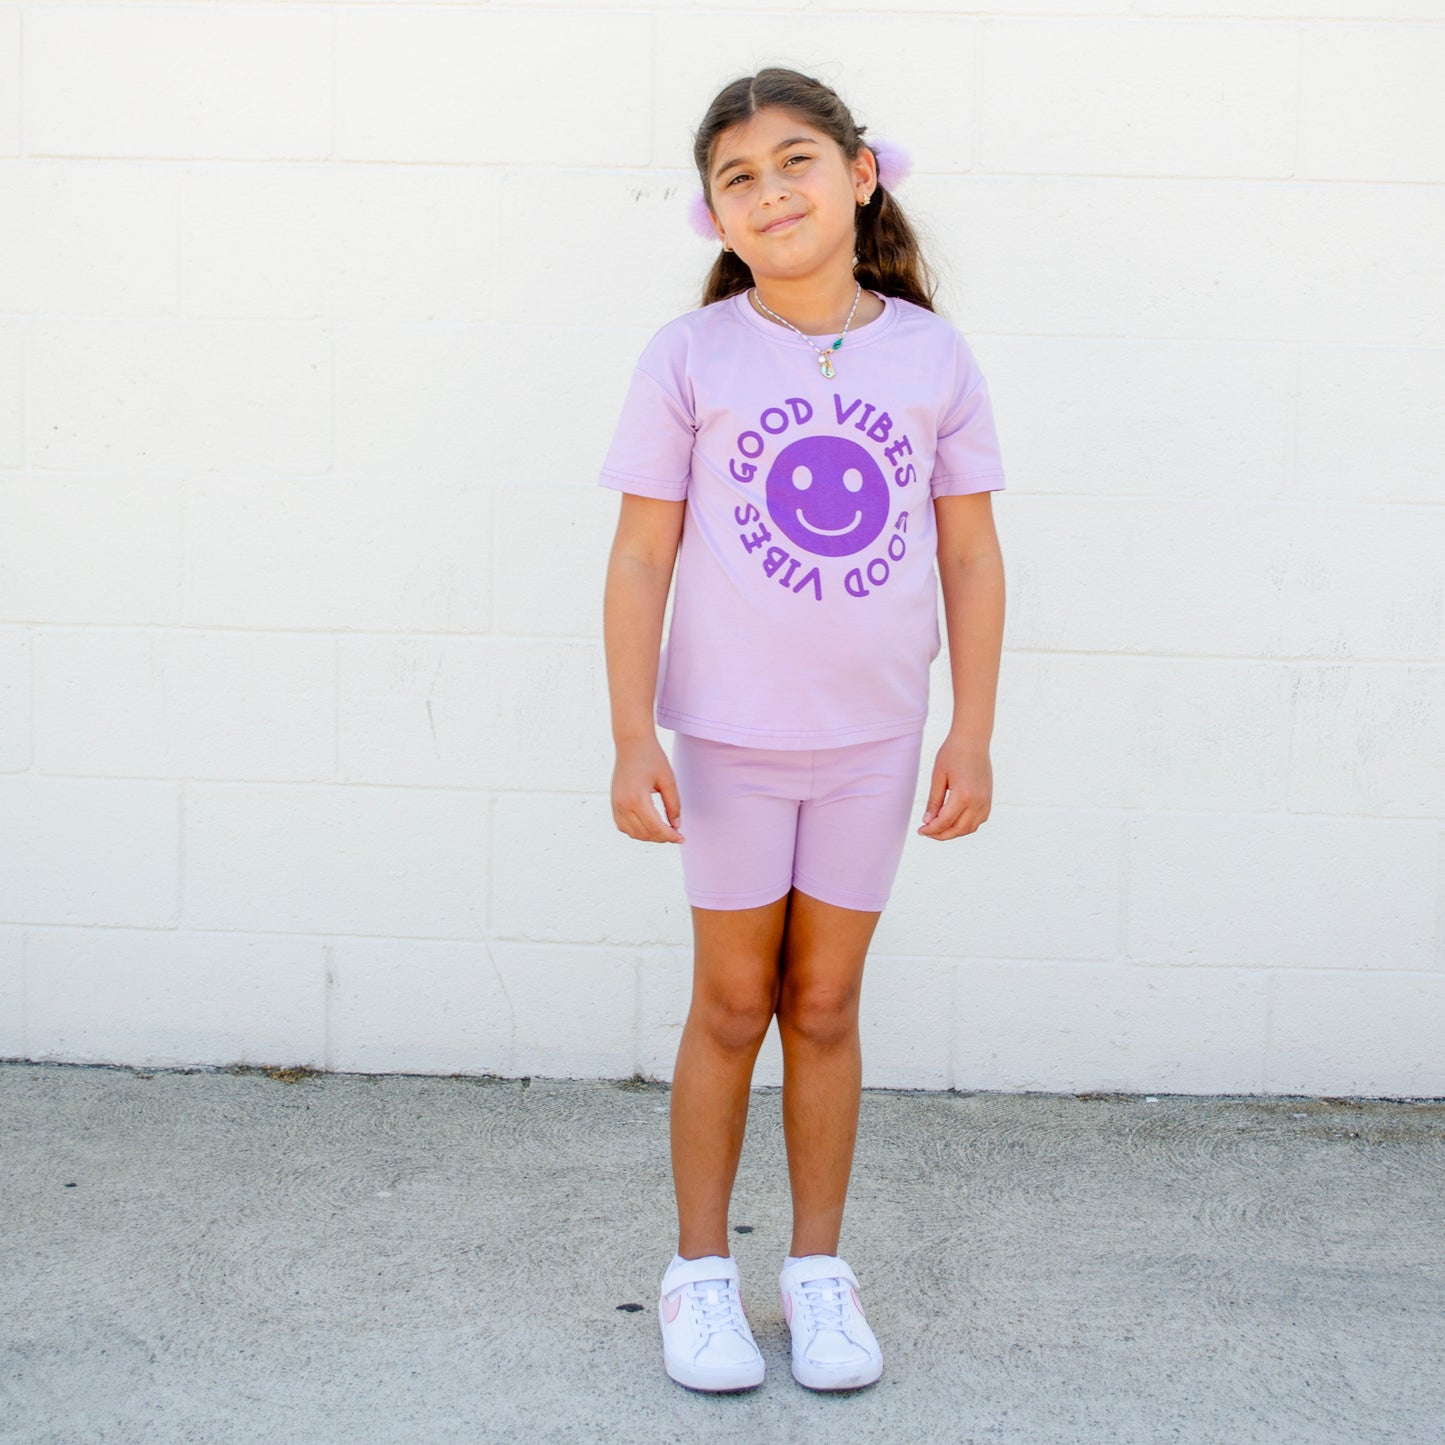 Happy Face Message T-Shirt and Short Set Kids | Pink